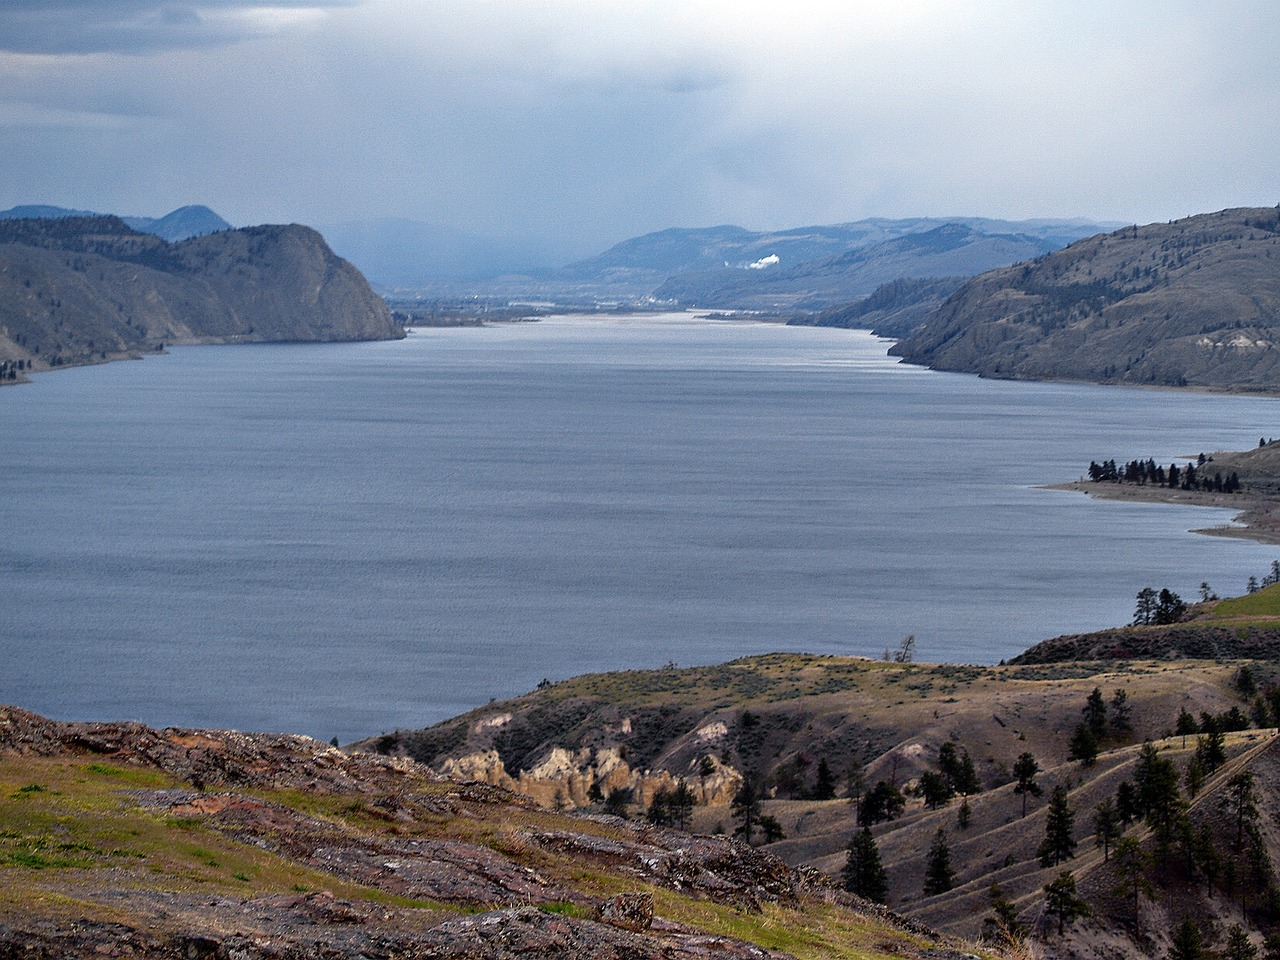 Discover the wonders of Kamloops at these 10 great attractions